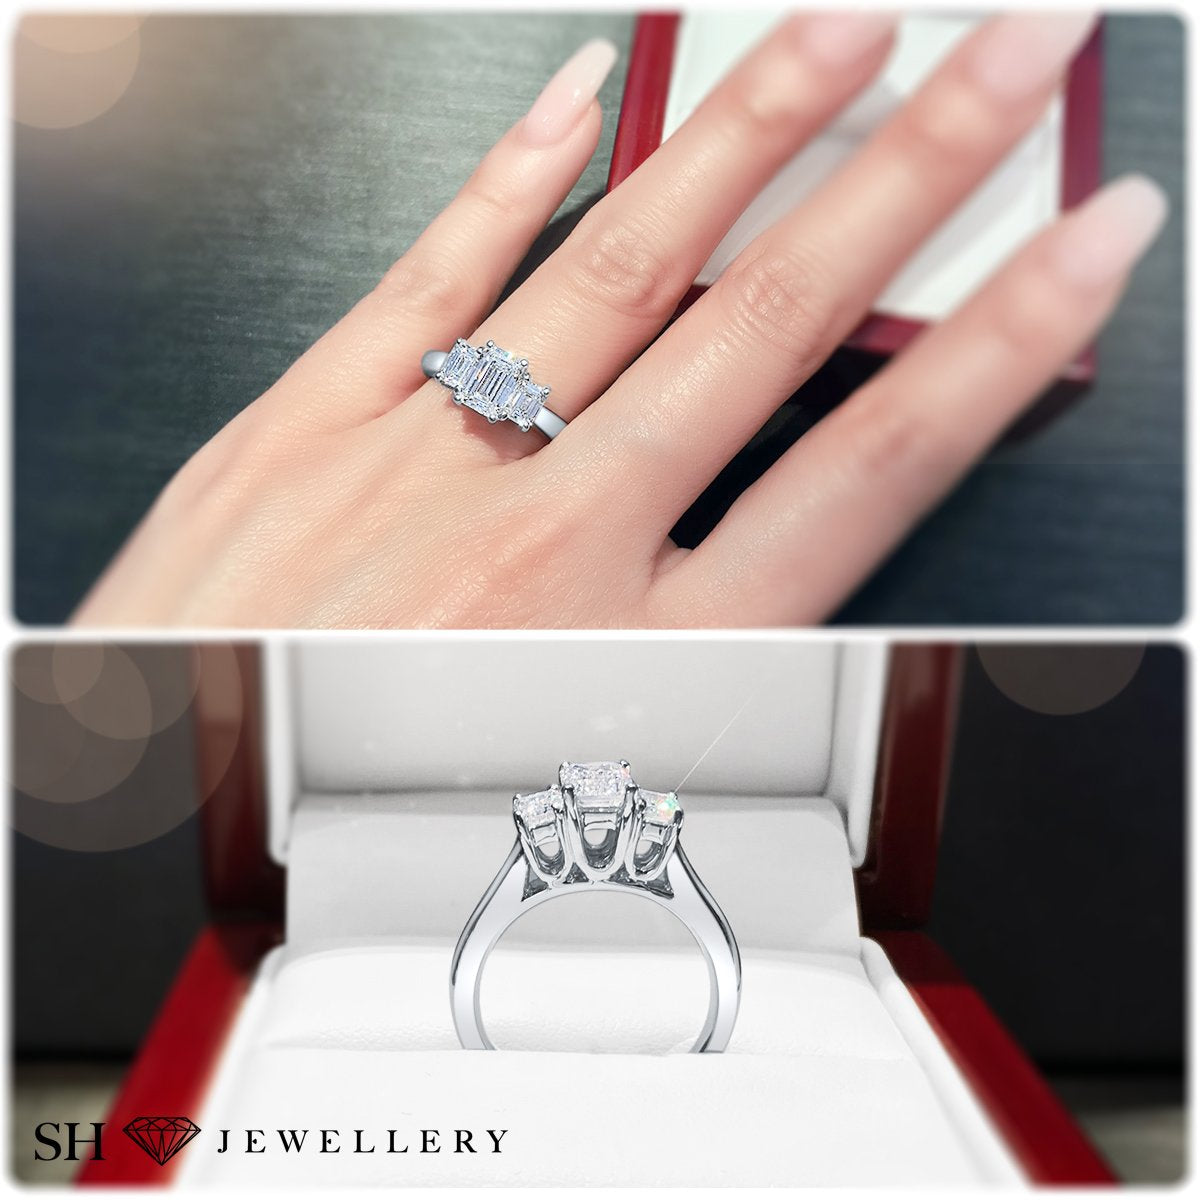 1.00 carat trilogy ring in white gold with an emerald cut diamond and  tapered baguettes - BAUNAT